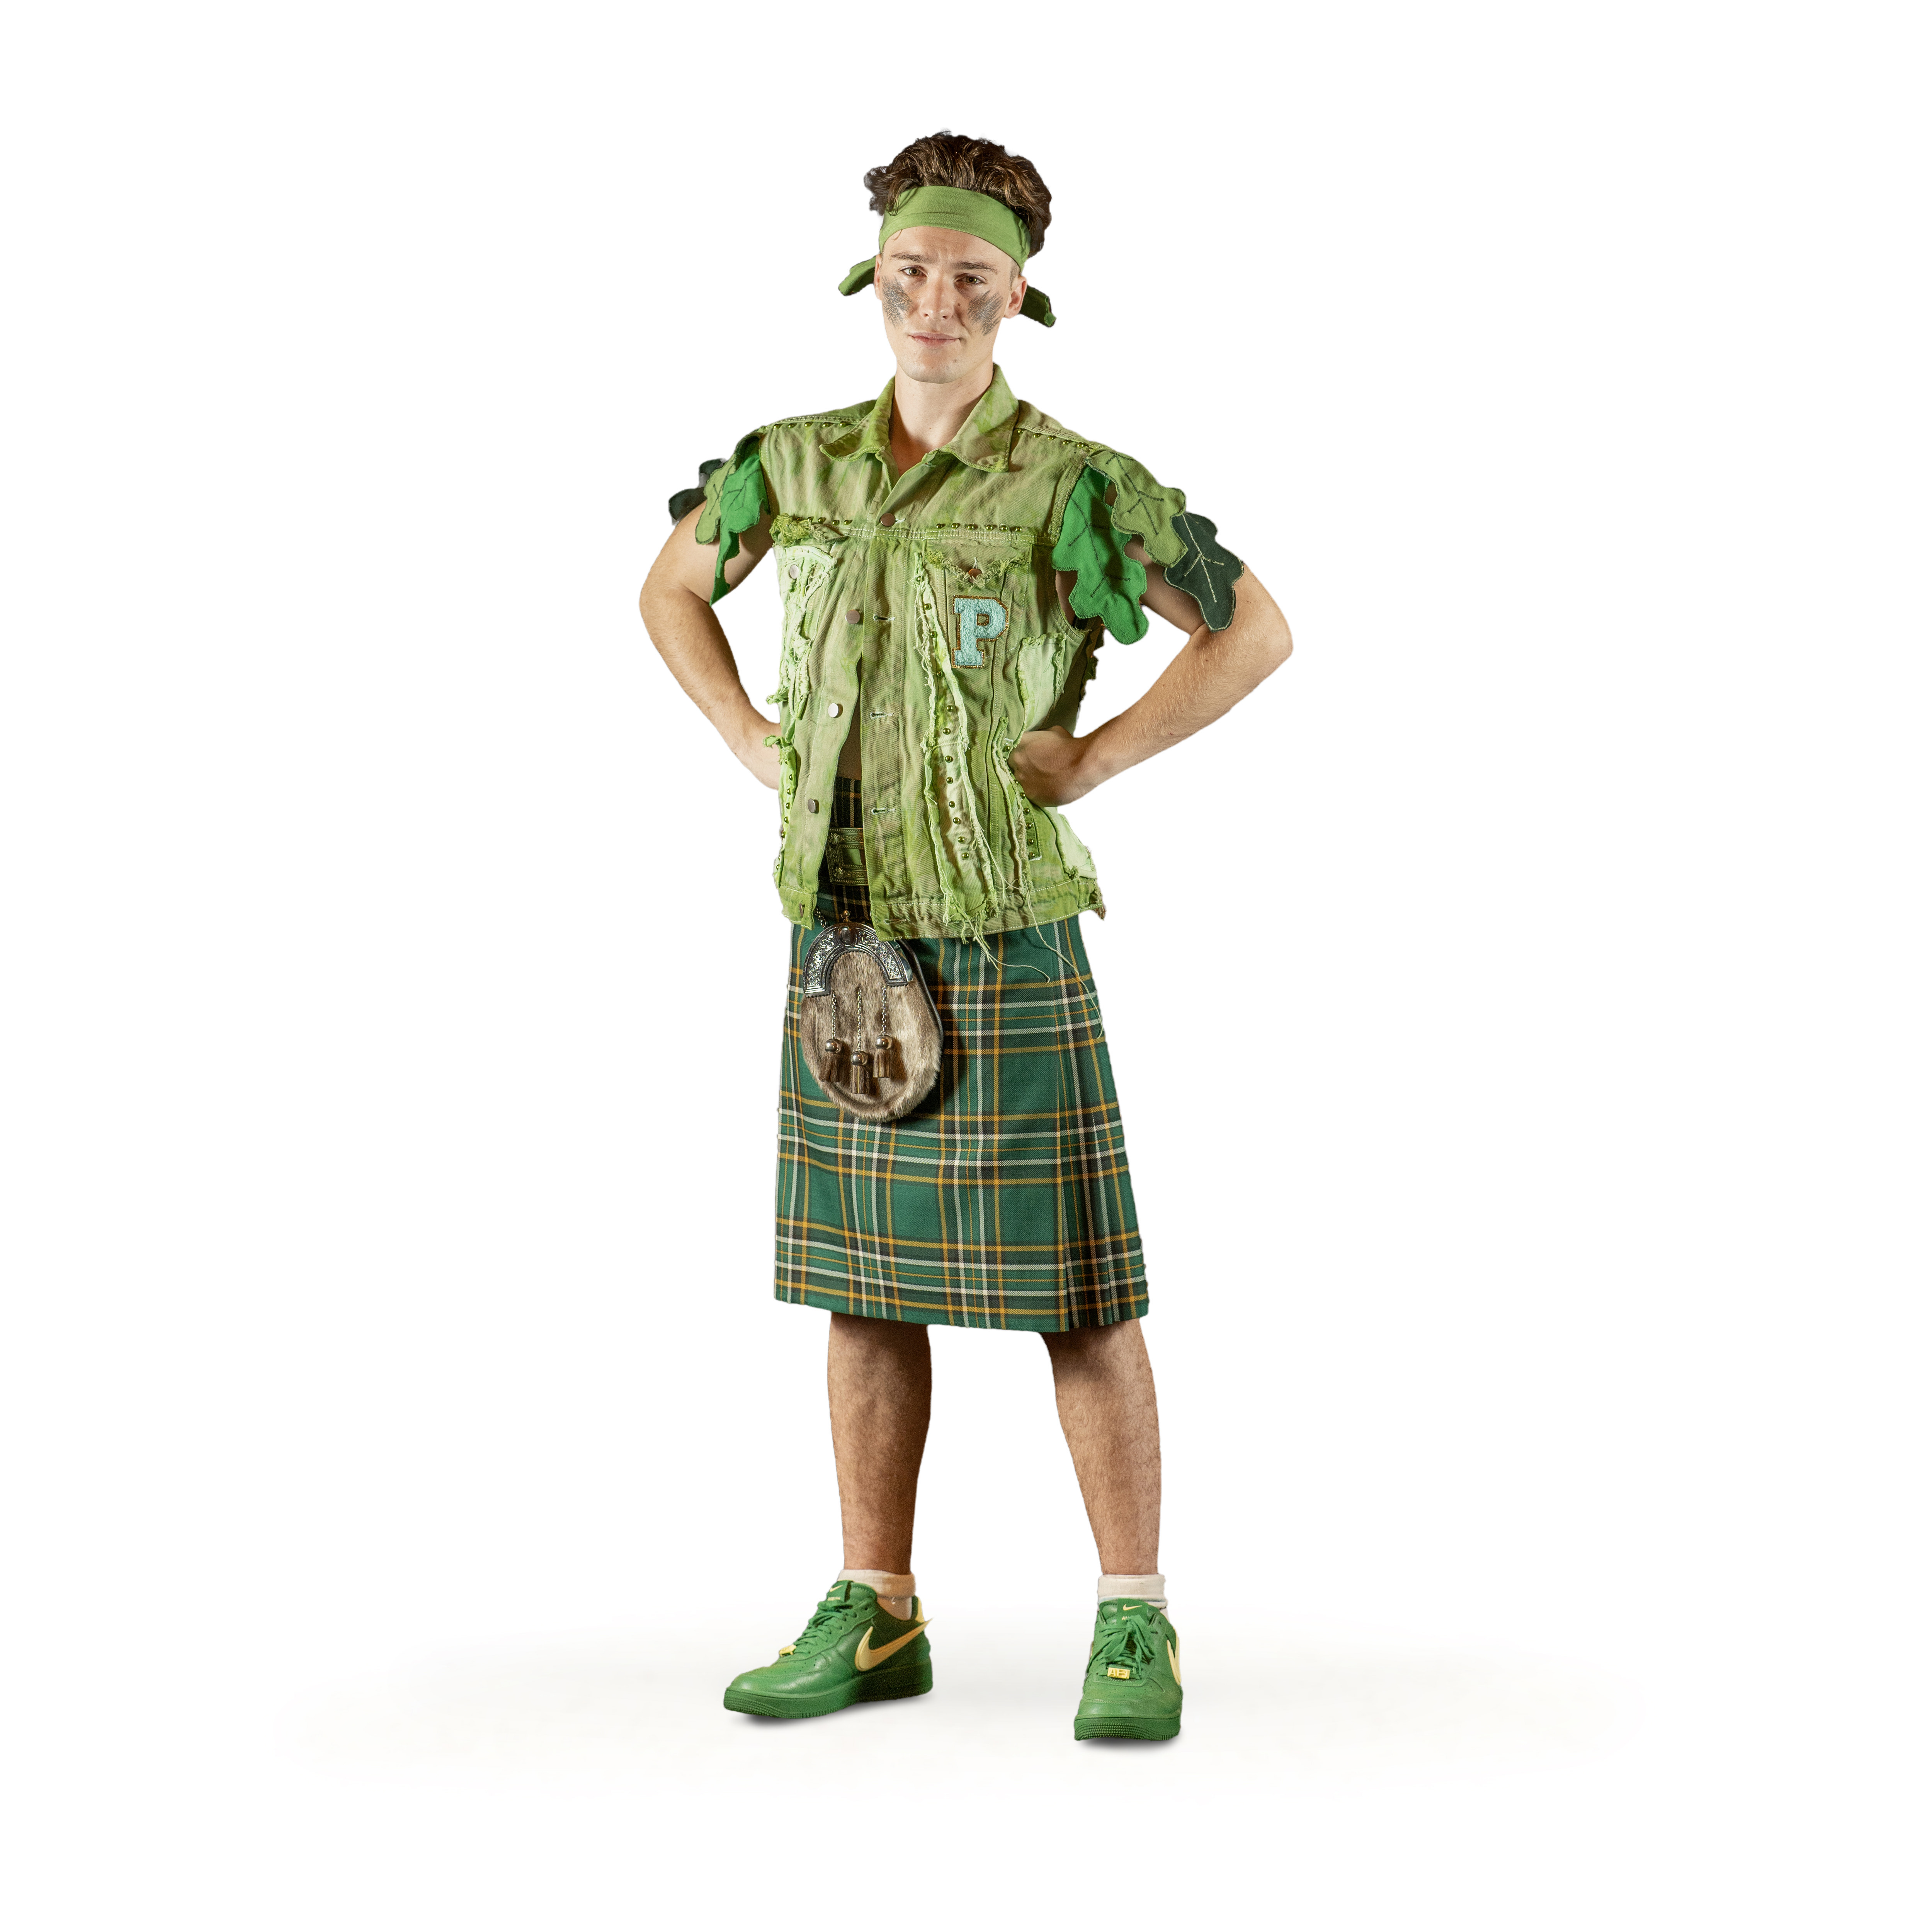 Jordan Conway, who plays Peter Pan, was fitted for a kilt ahead of the Scottish shows